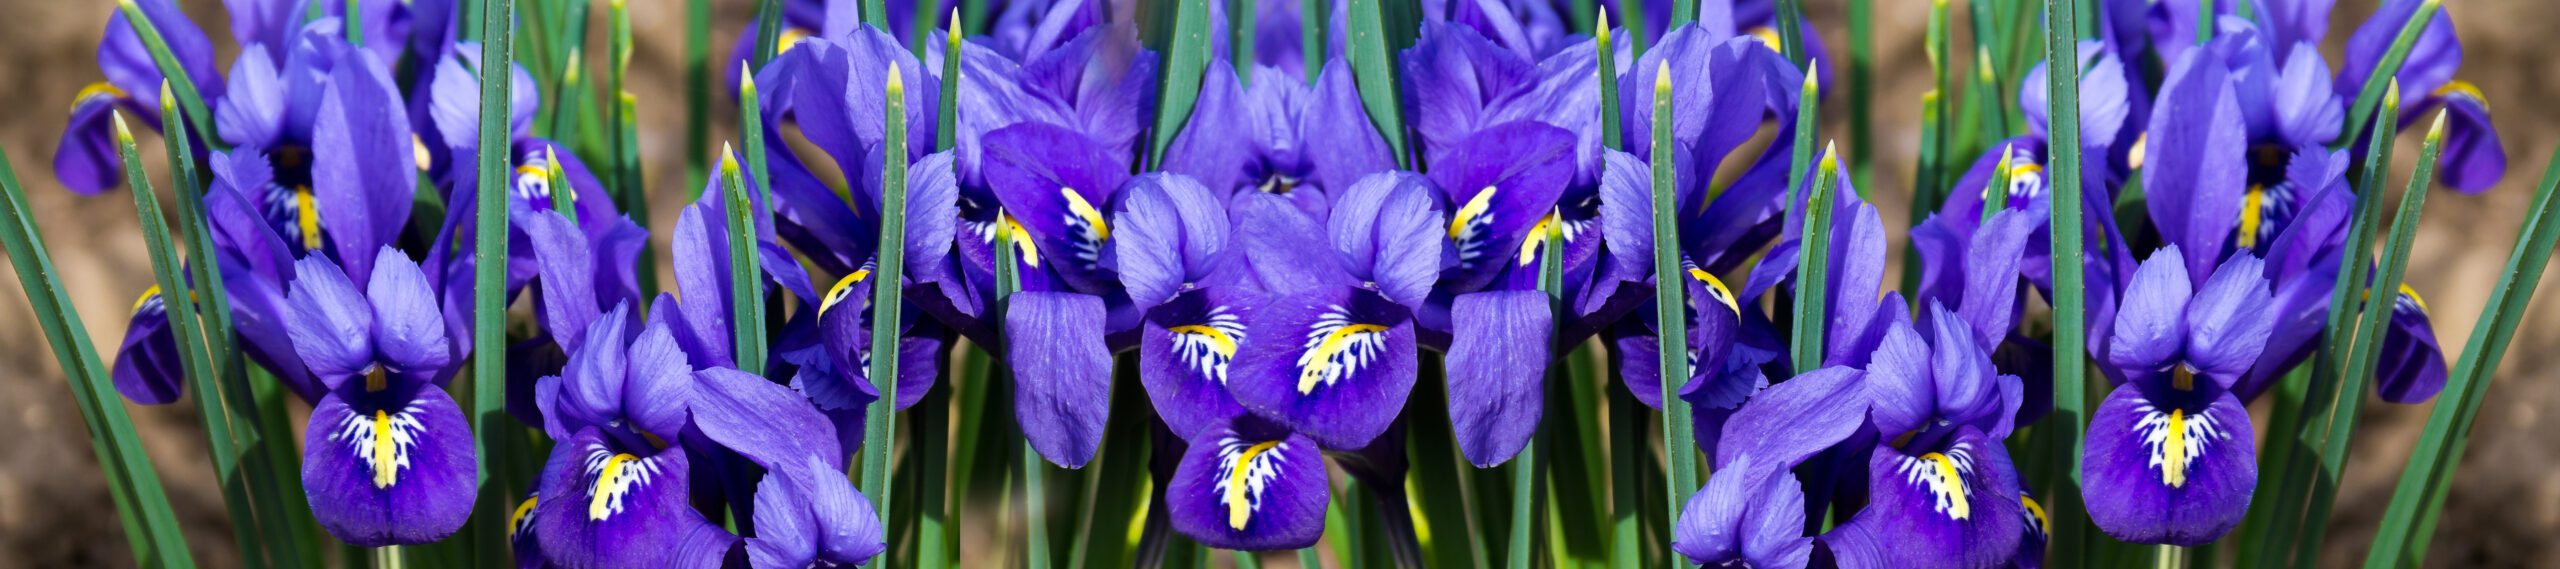 panorama  cover morning flower iris park natural  blurred background  header